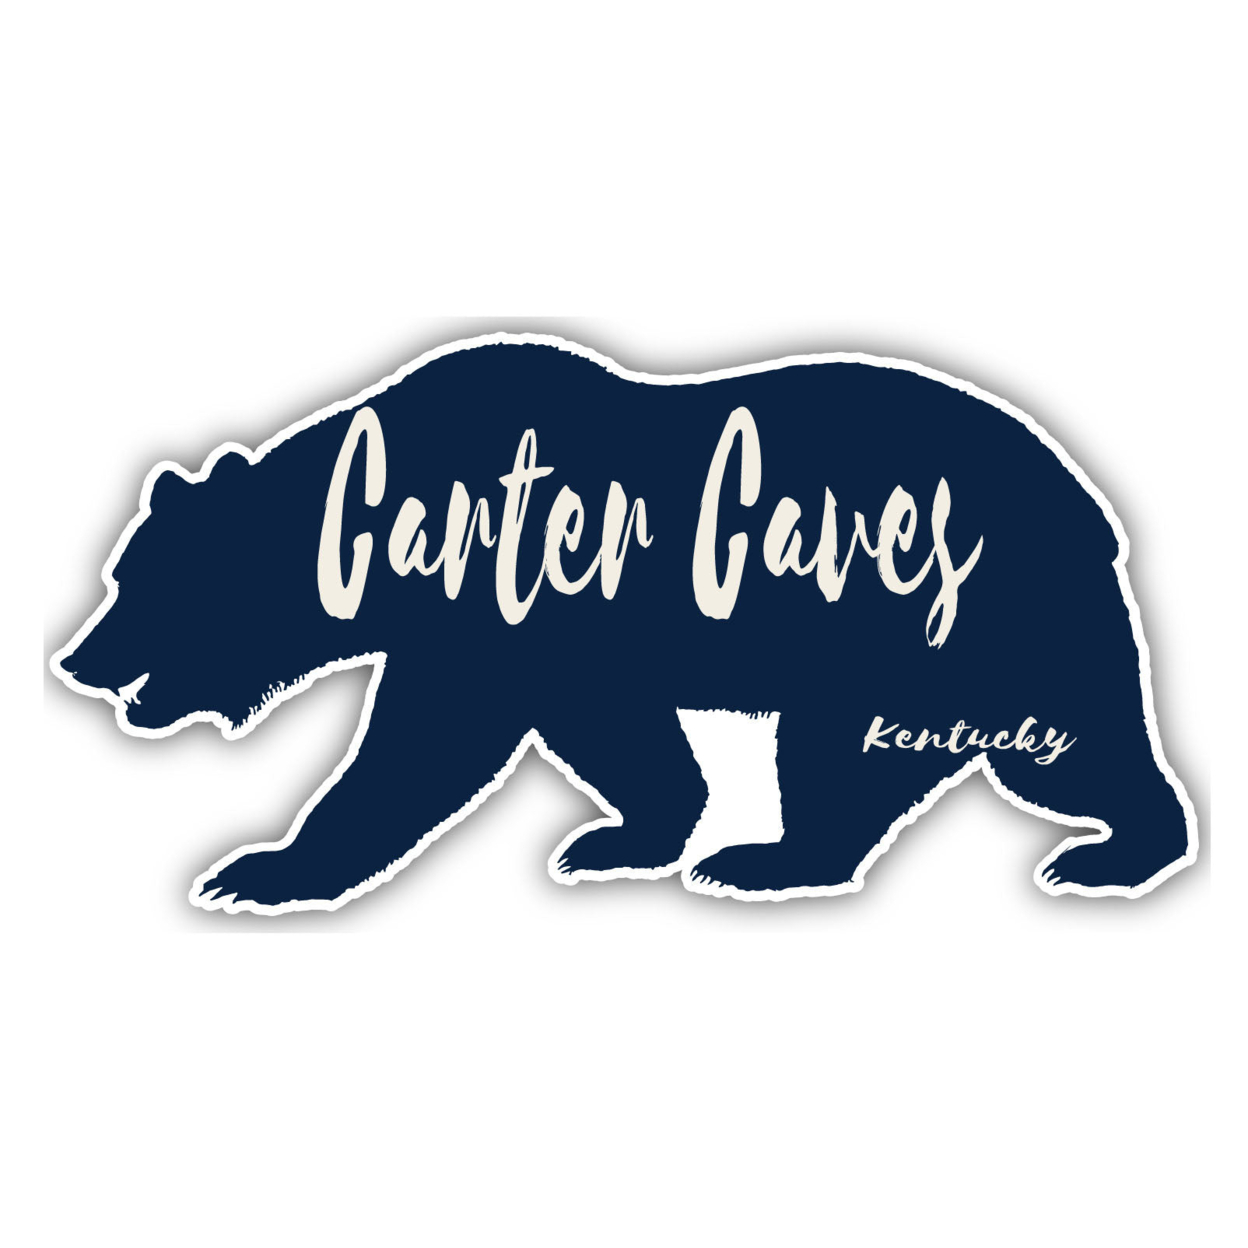 Carter Caves Kentucky Souvenir Decorative Stickers (Choose Theme And Size) - 4-Pack, 8-Inch, Bear